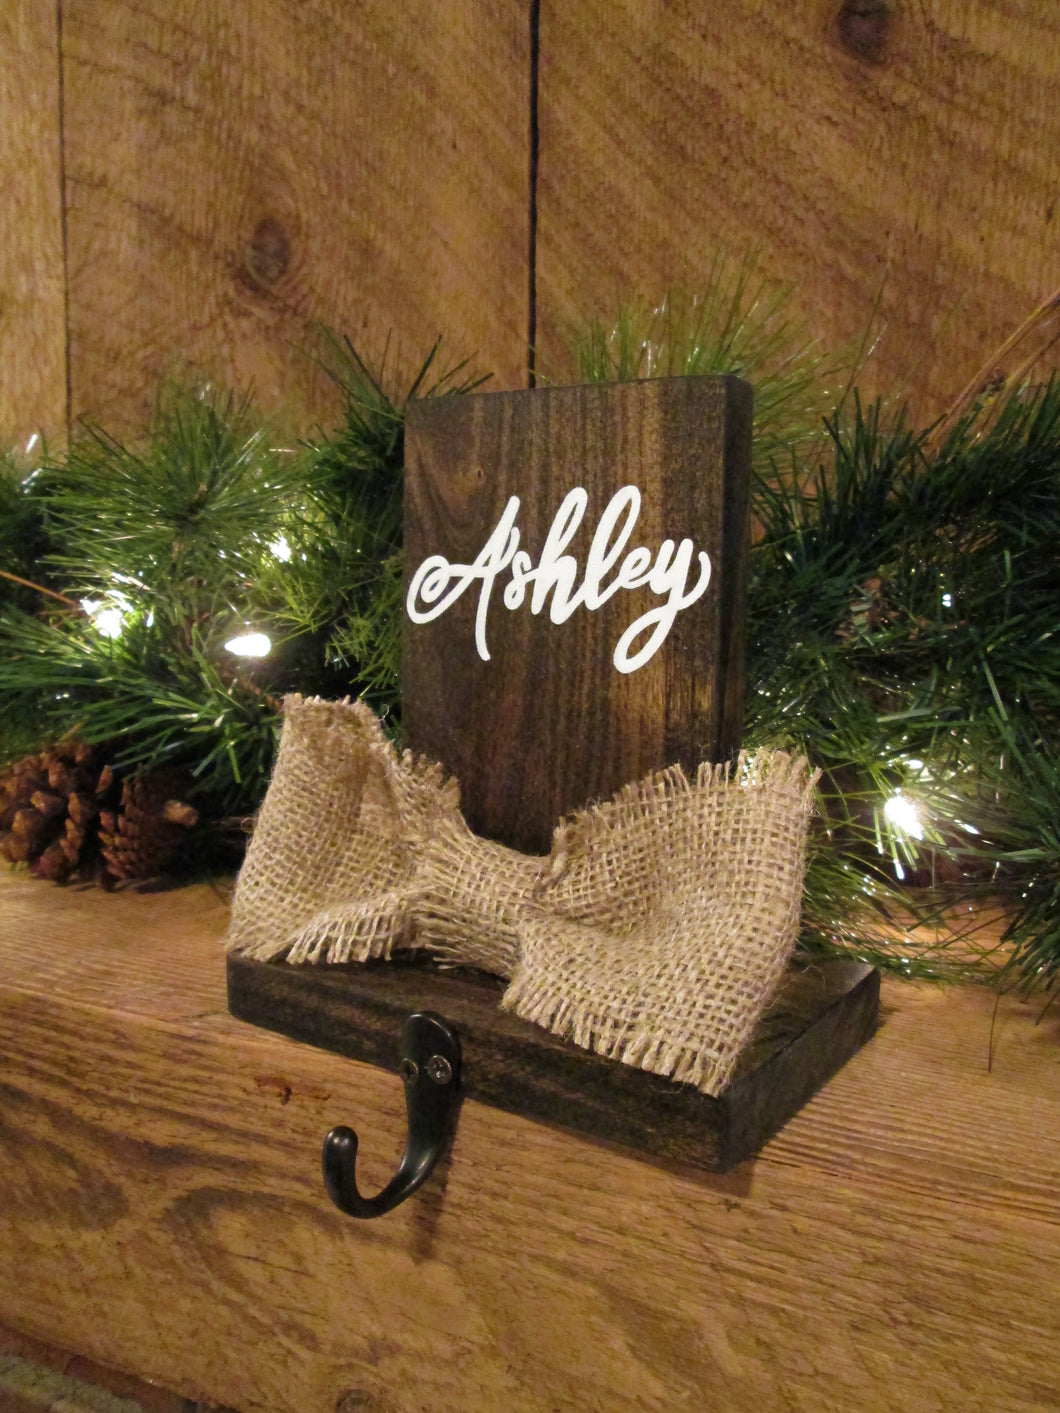 Rustic personalized wooden stocking hanger for shelf or mantel by Perryhill Rustics